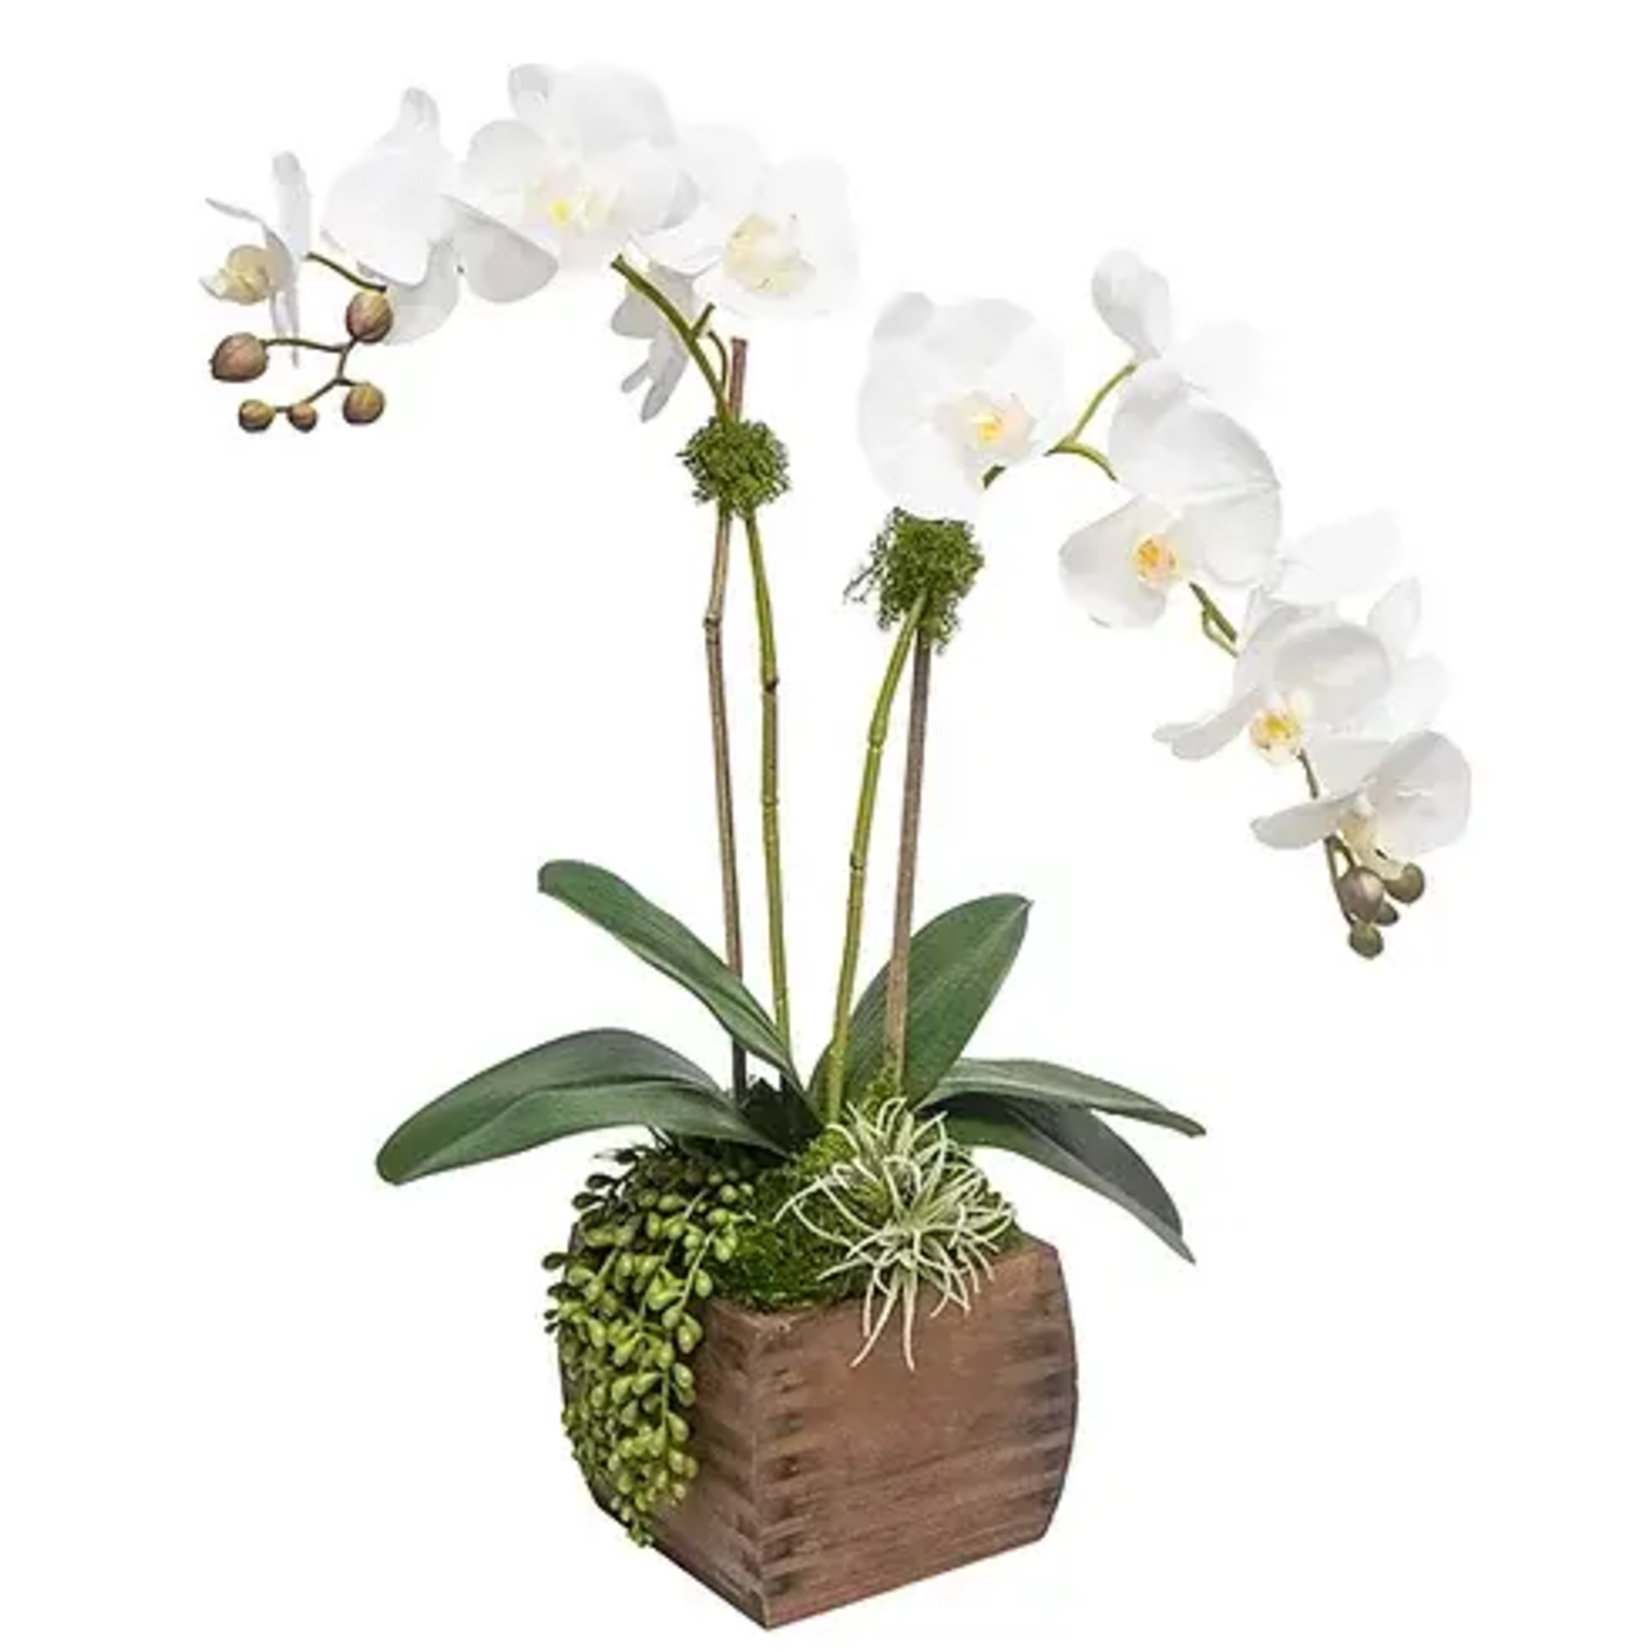 The Ivy Guild White Orchids In Small Wood Box Arrangement